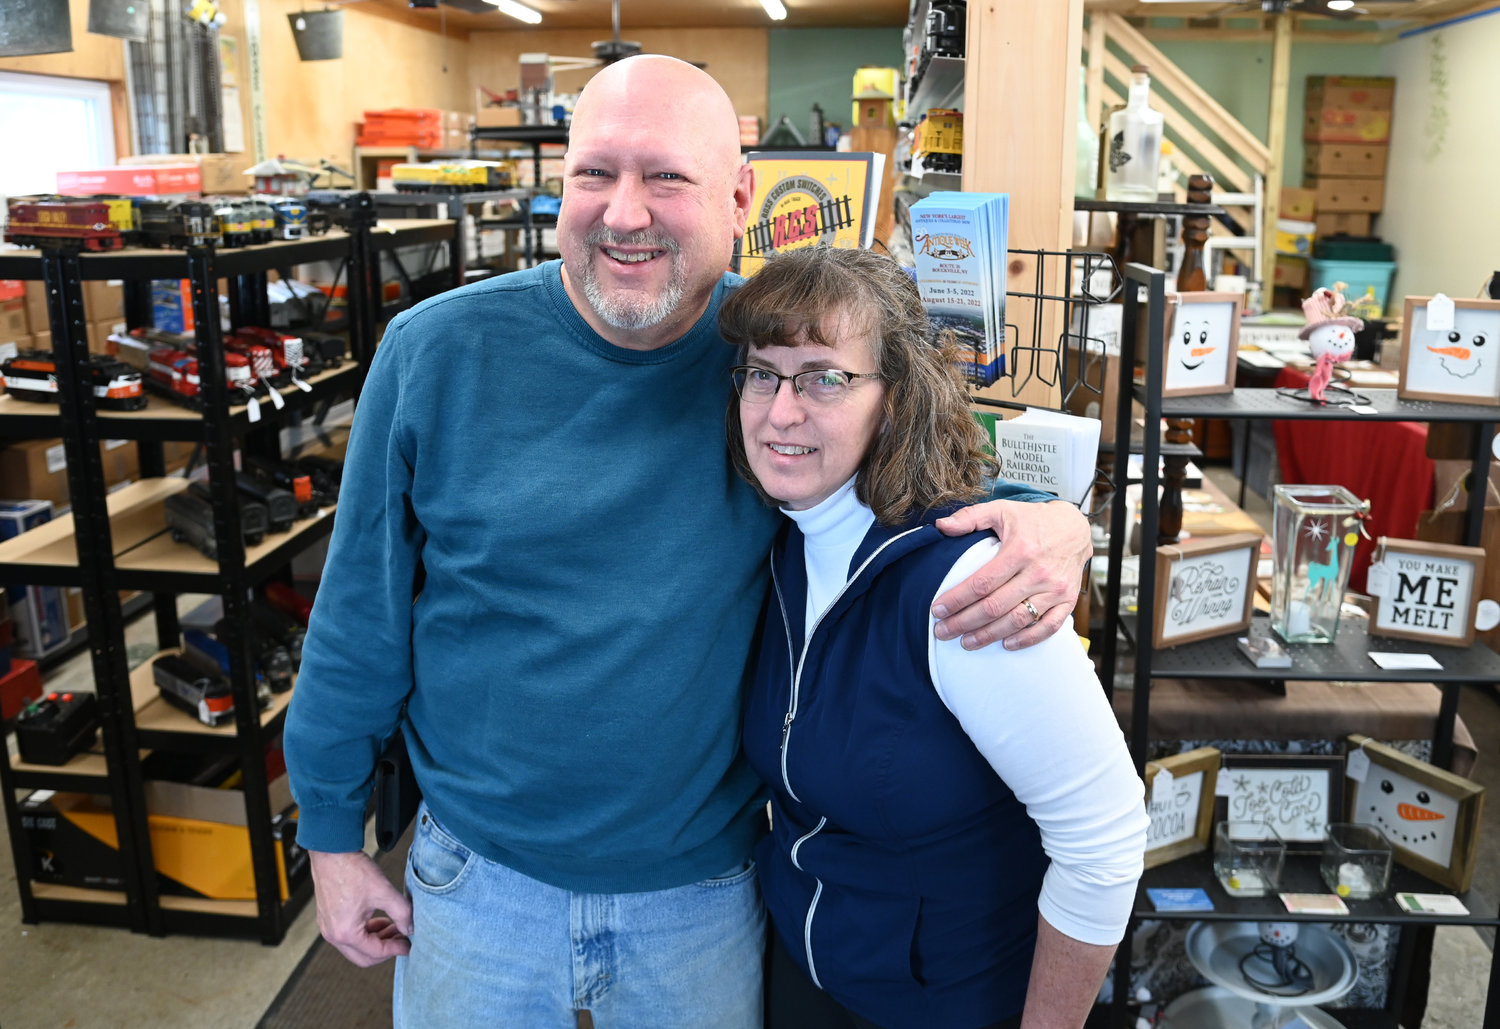 Whistle Post Antiques and Whistle Post Creations owners John and Brenda Thorna pose between their shops Friday, Feb. 3 in Bouckville.